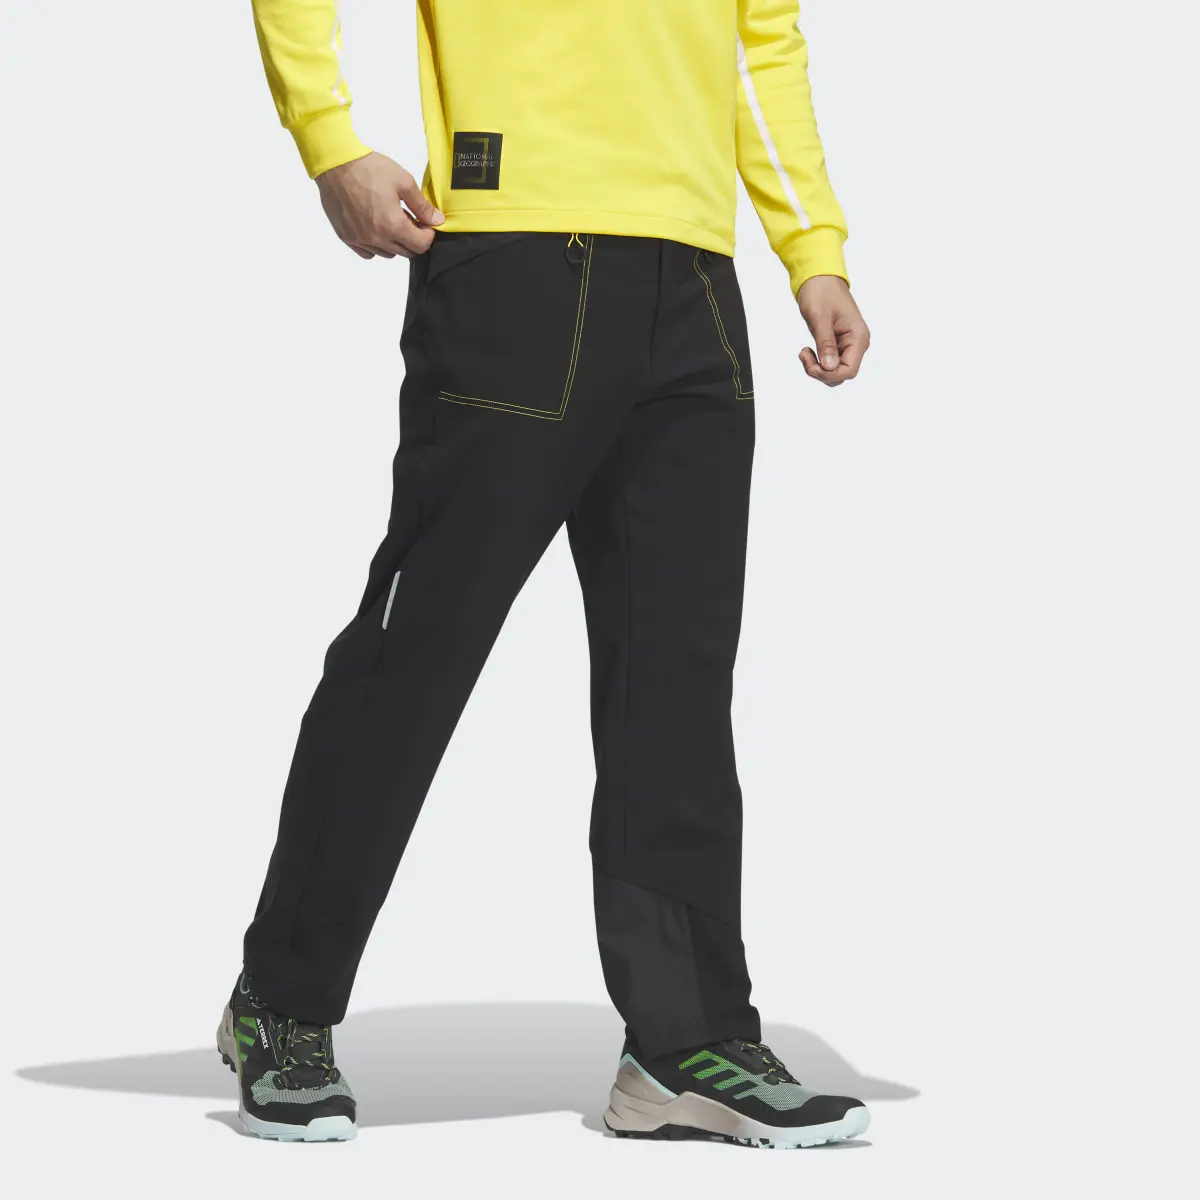 Adidas National Geographic Soft Shell Trousers. 3